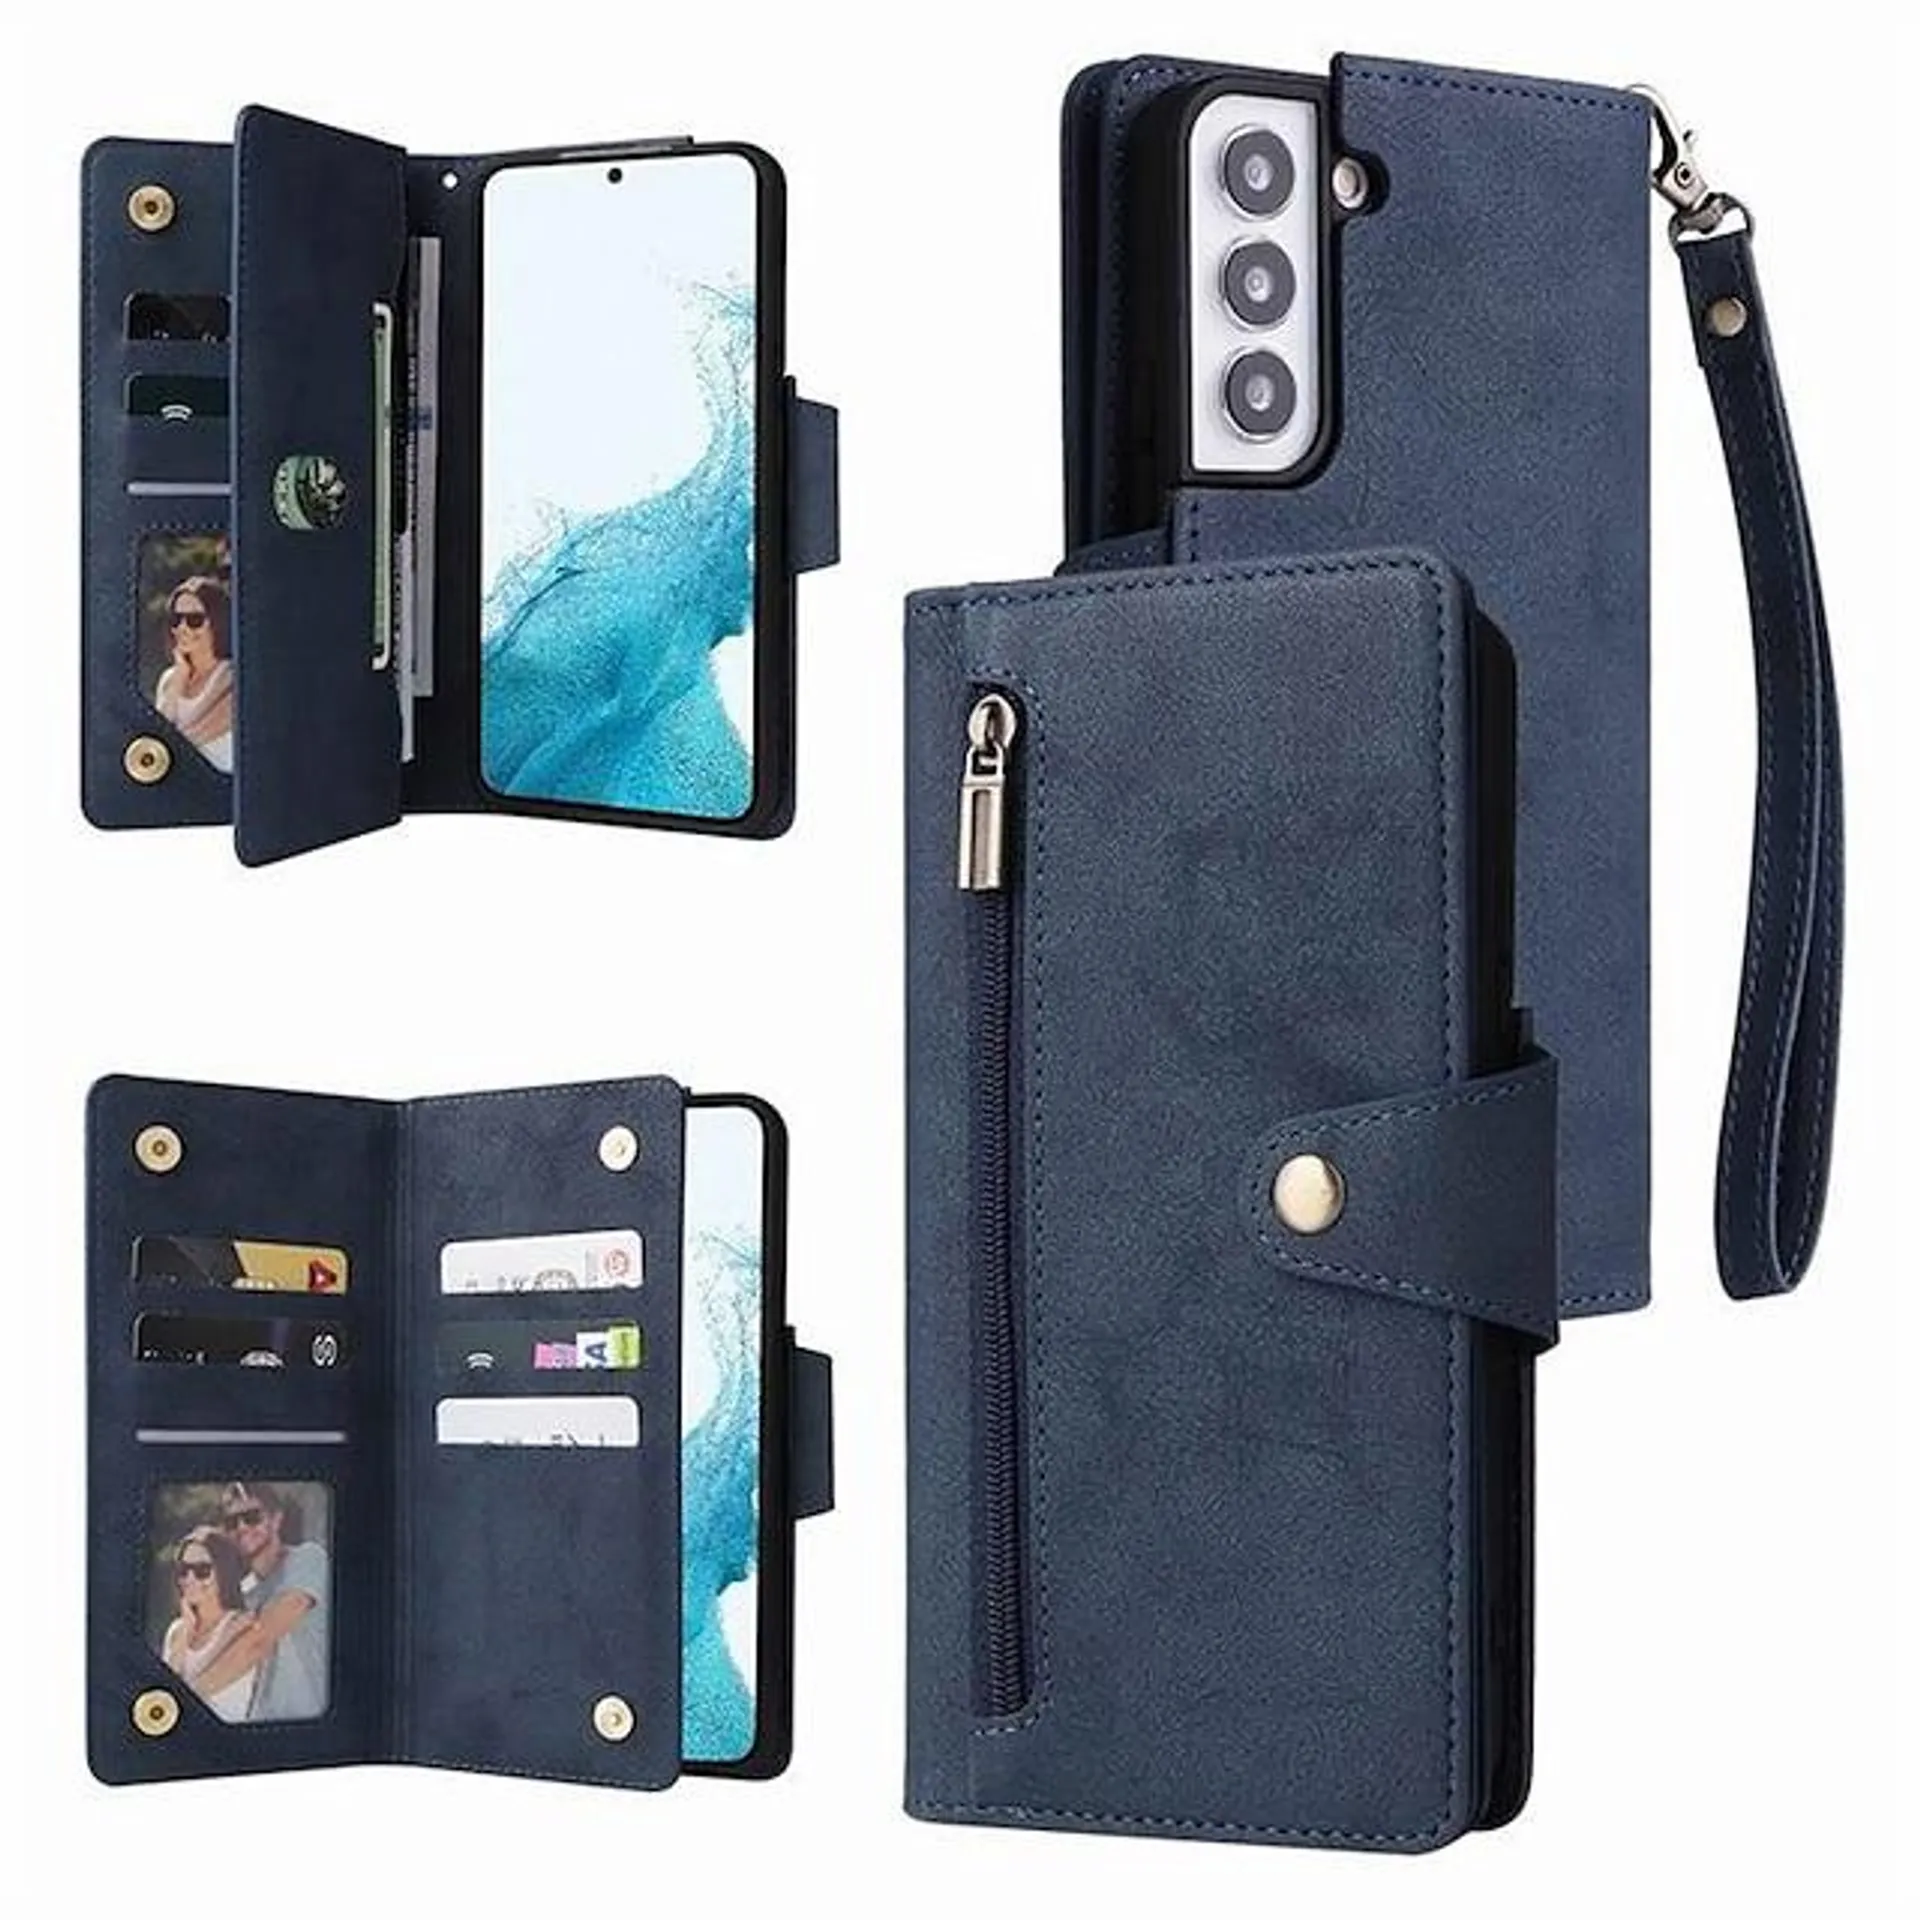 Phone Case For Samsung Galaxy S23 S22 S21 S20 Plus Ultra A73 A53 A33 Wallet Zipper with Wrist Strap Solid Colored TPU PU Leather